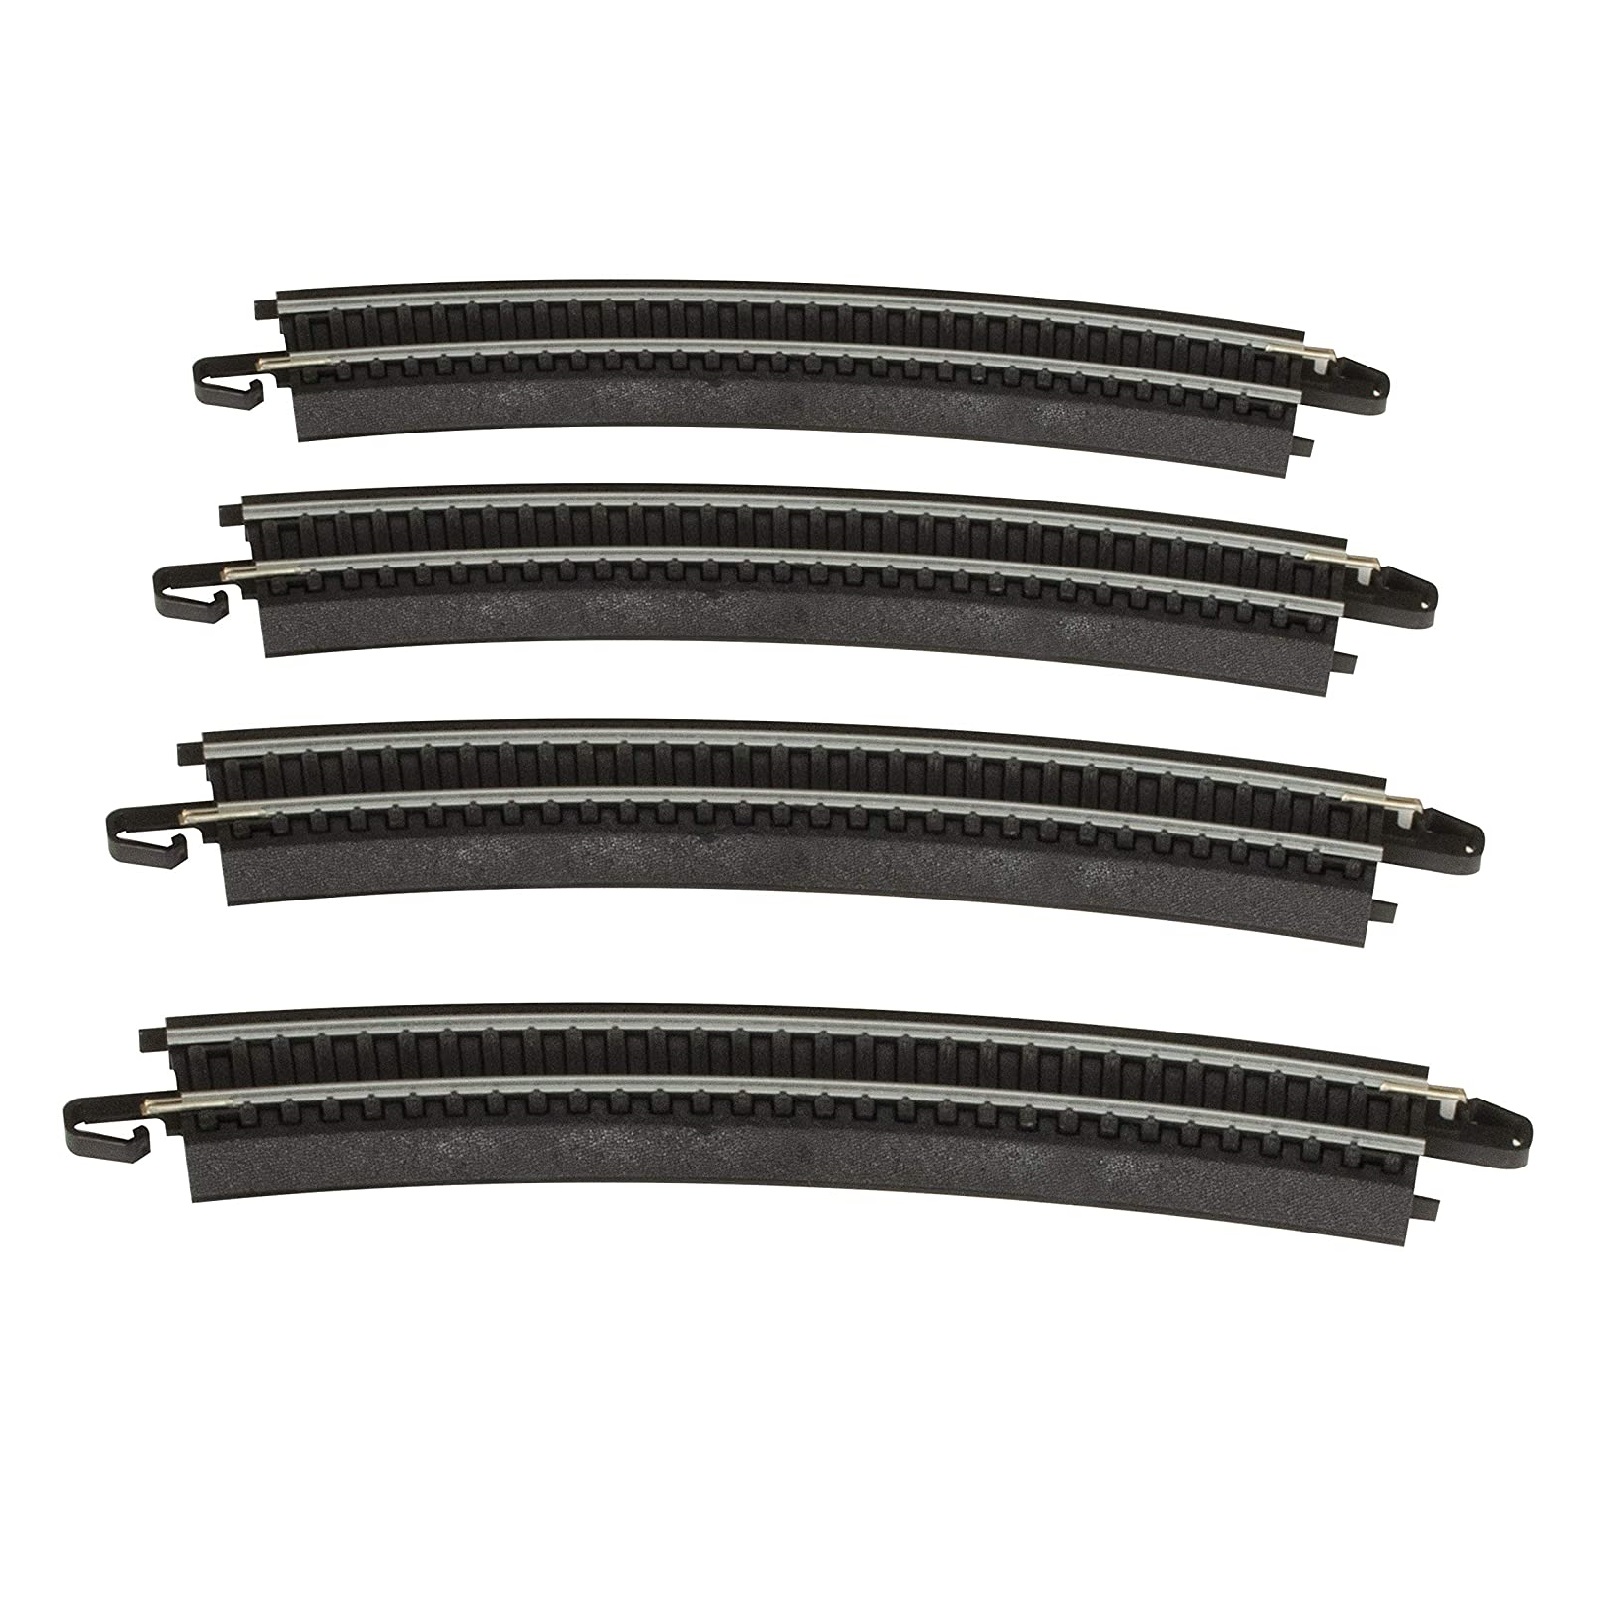 Bachmann 44480 HO Scale E-Z Track 18 Radius Curved Steal Alloy 1 Piece same as 44401 by Bachman 